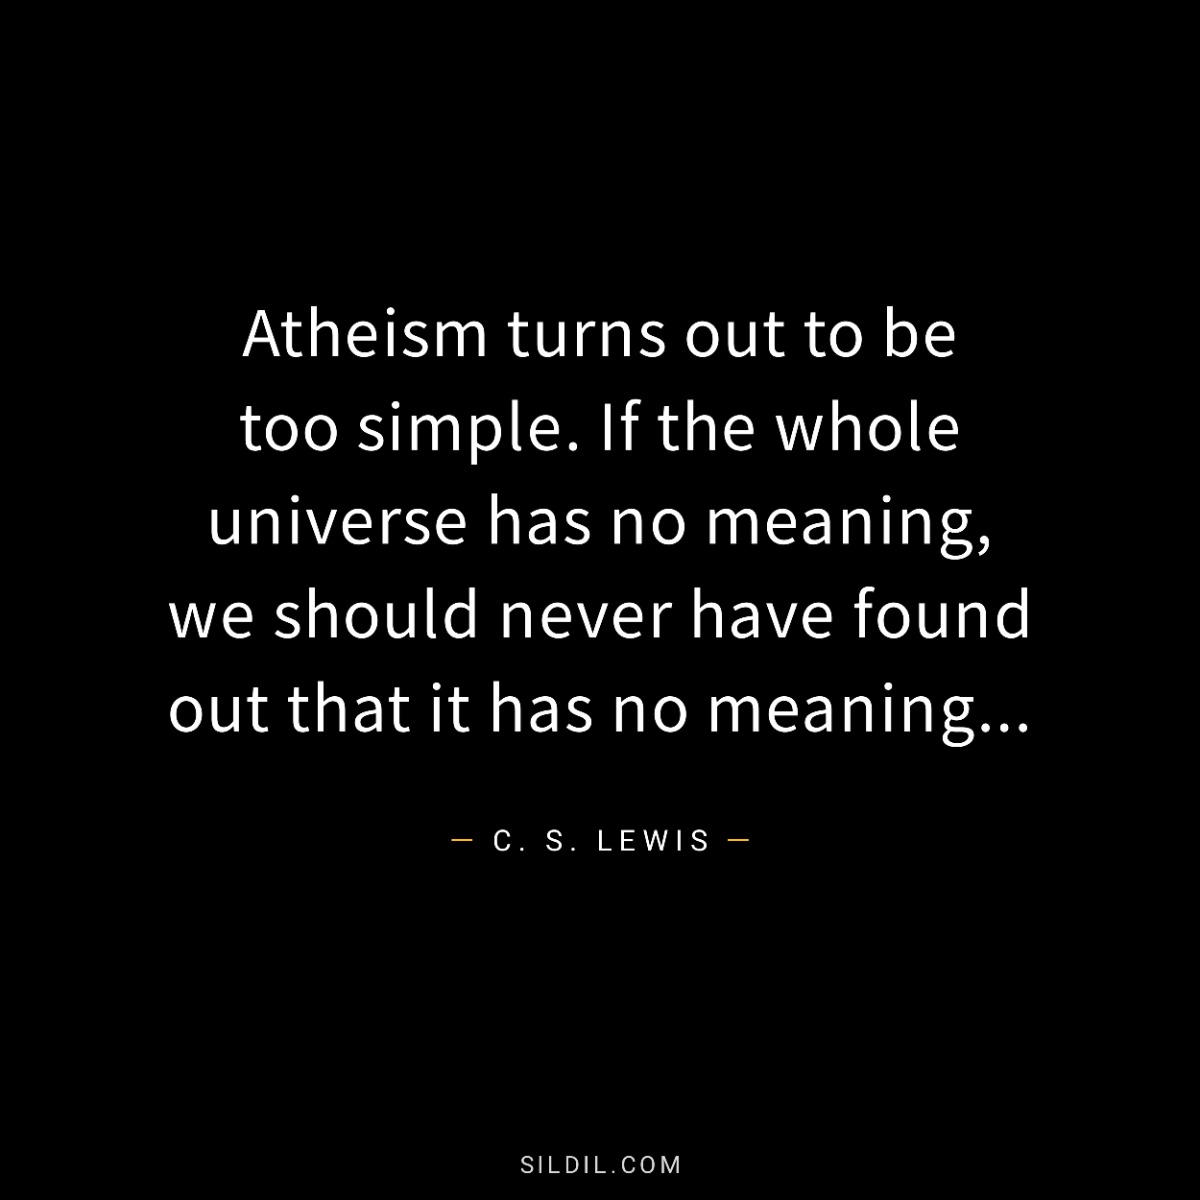 Atheism turns out to be too simple. If the whole universe has no meaning, we should never have found out that it has no meaning...